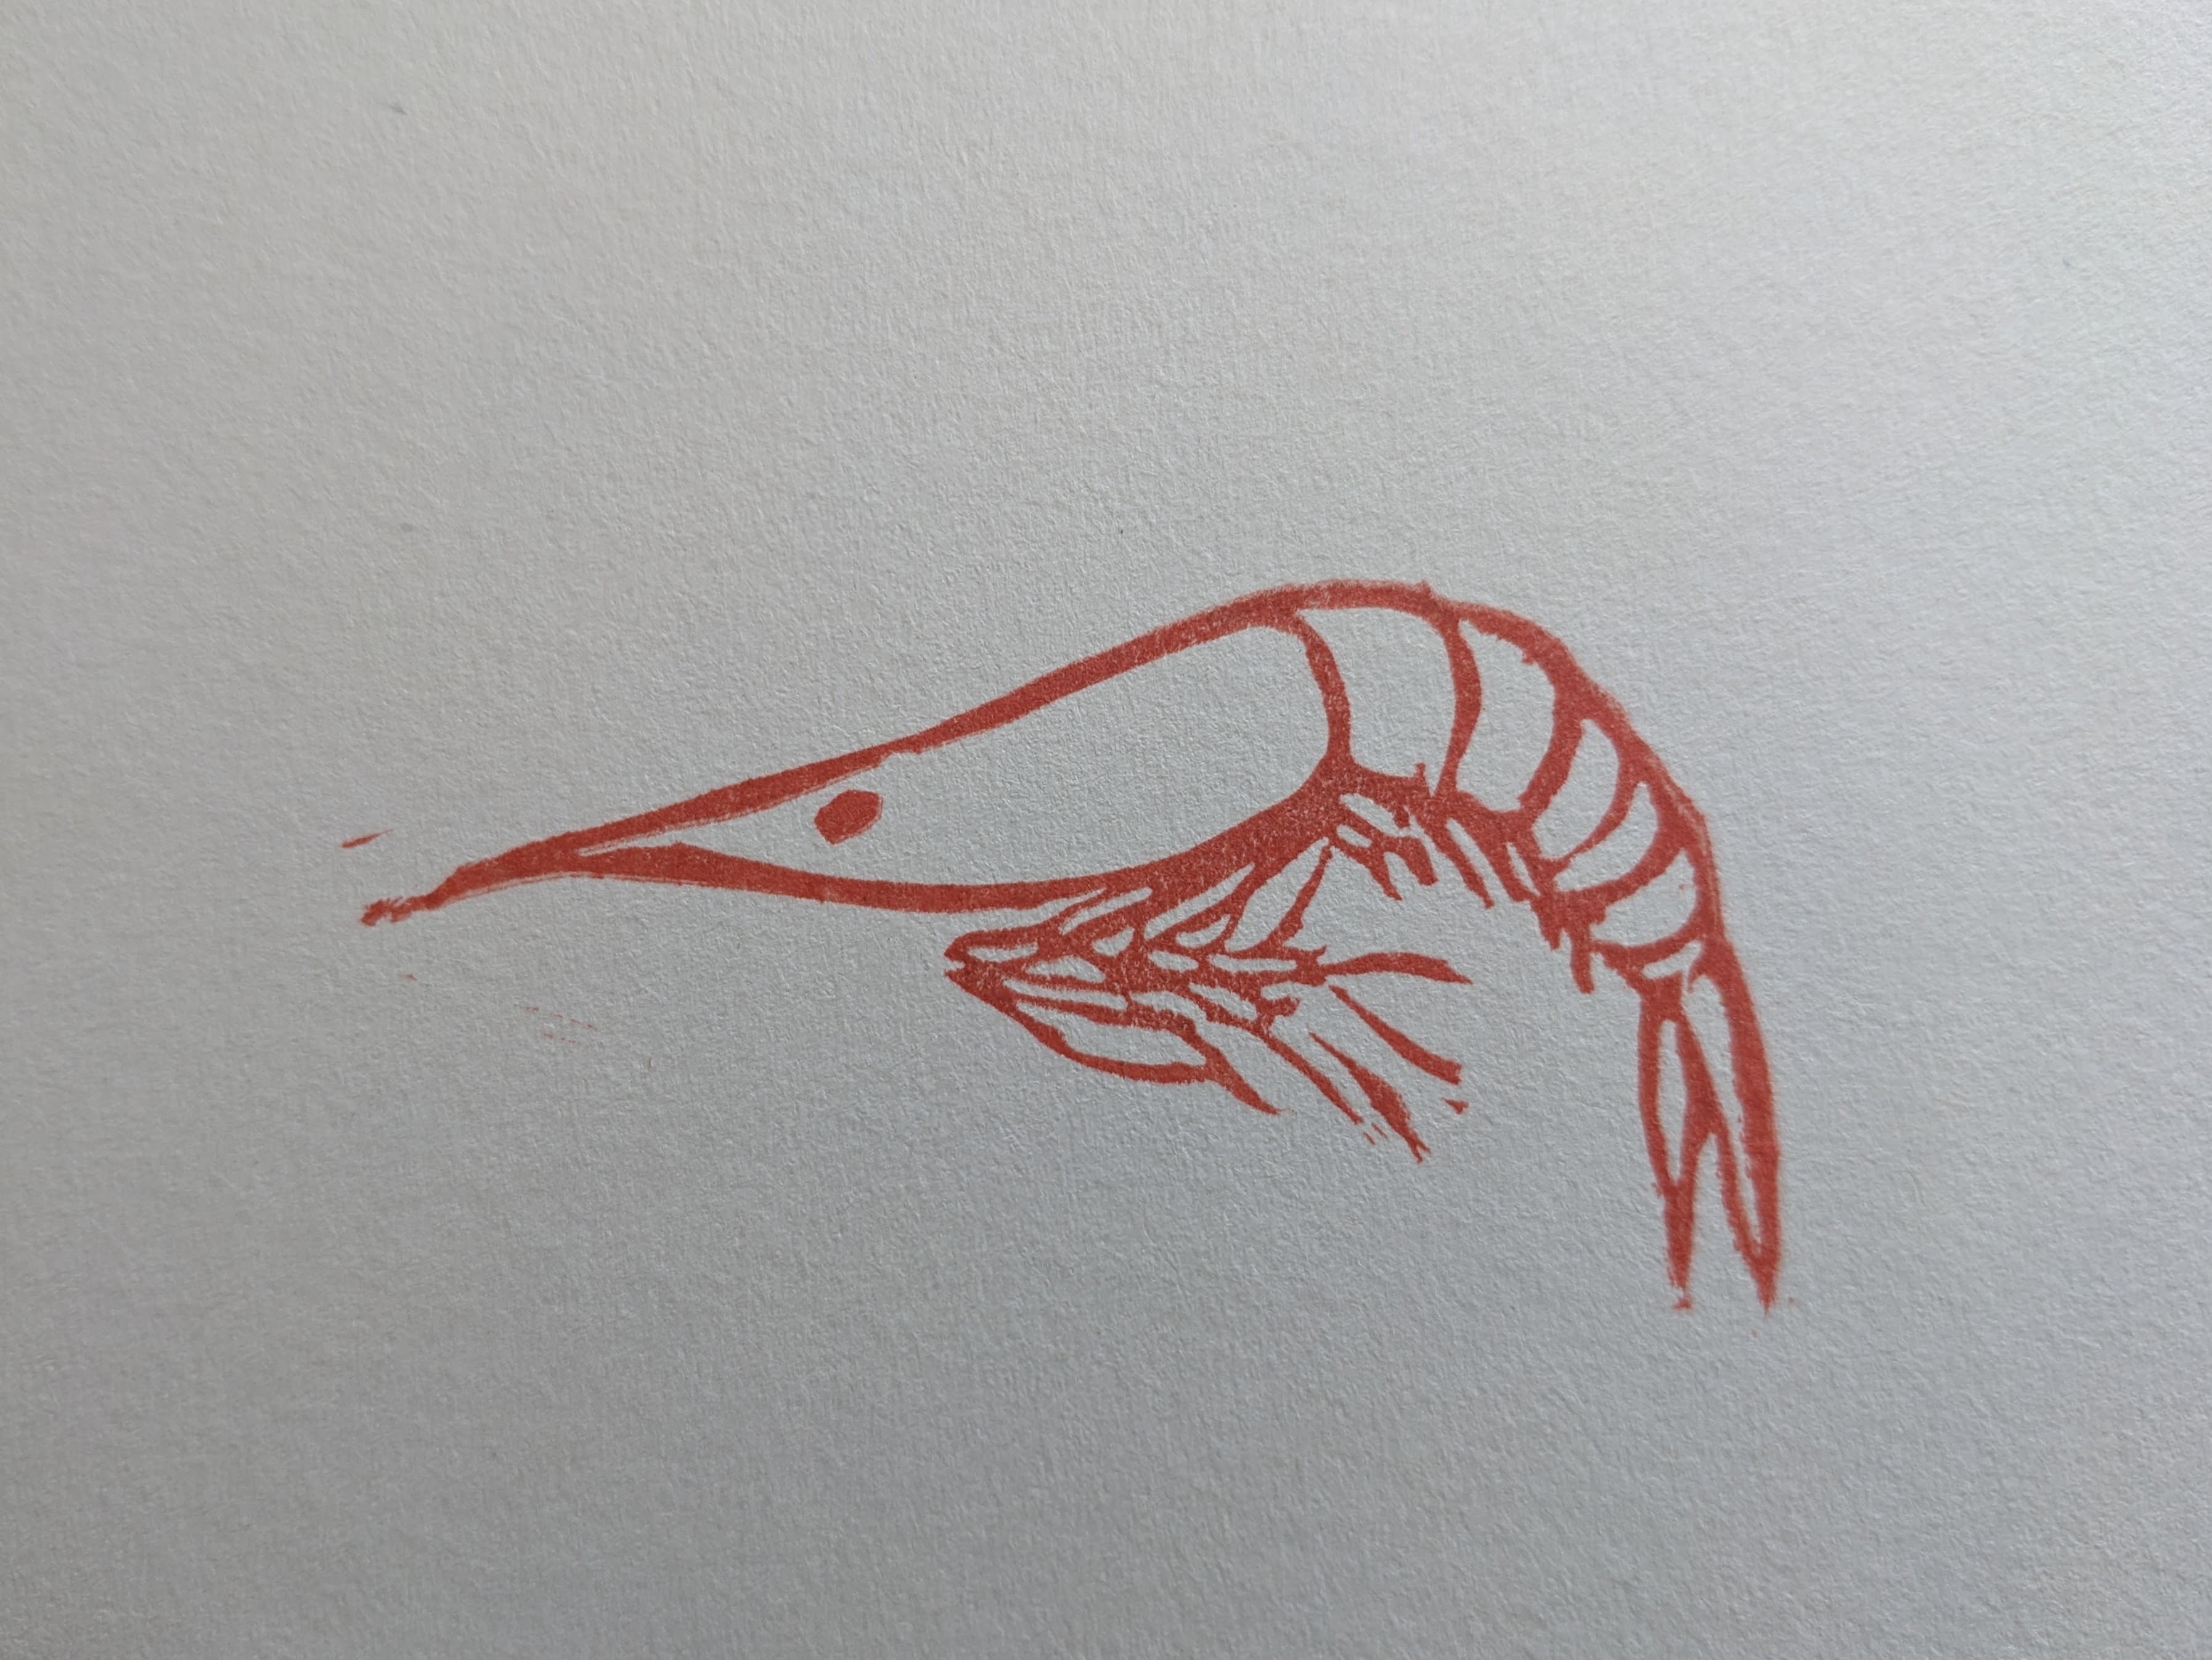 A print of a small shrimp with slender little leggies in orange ink.